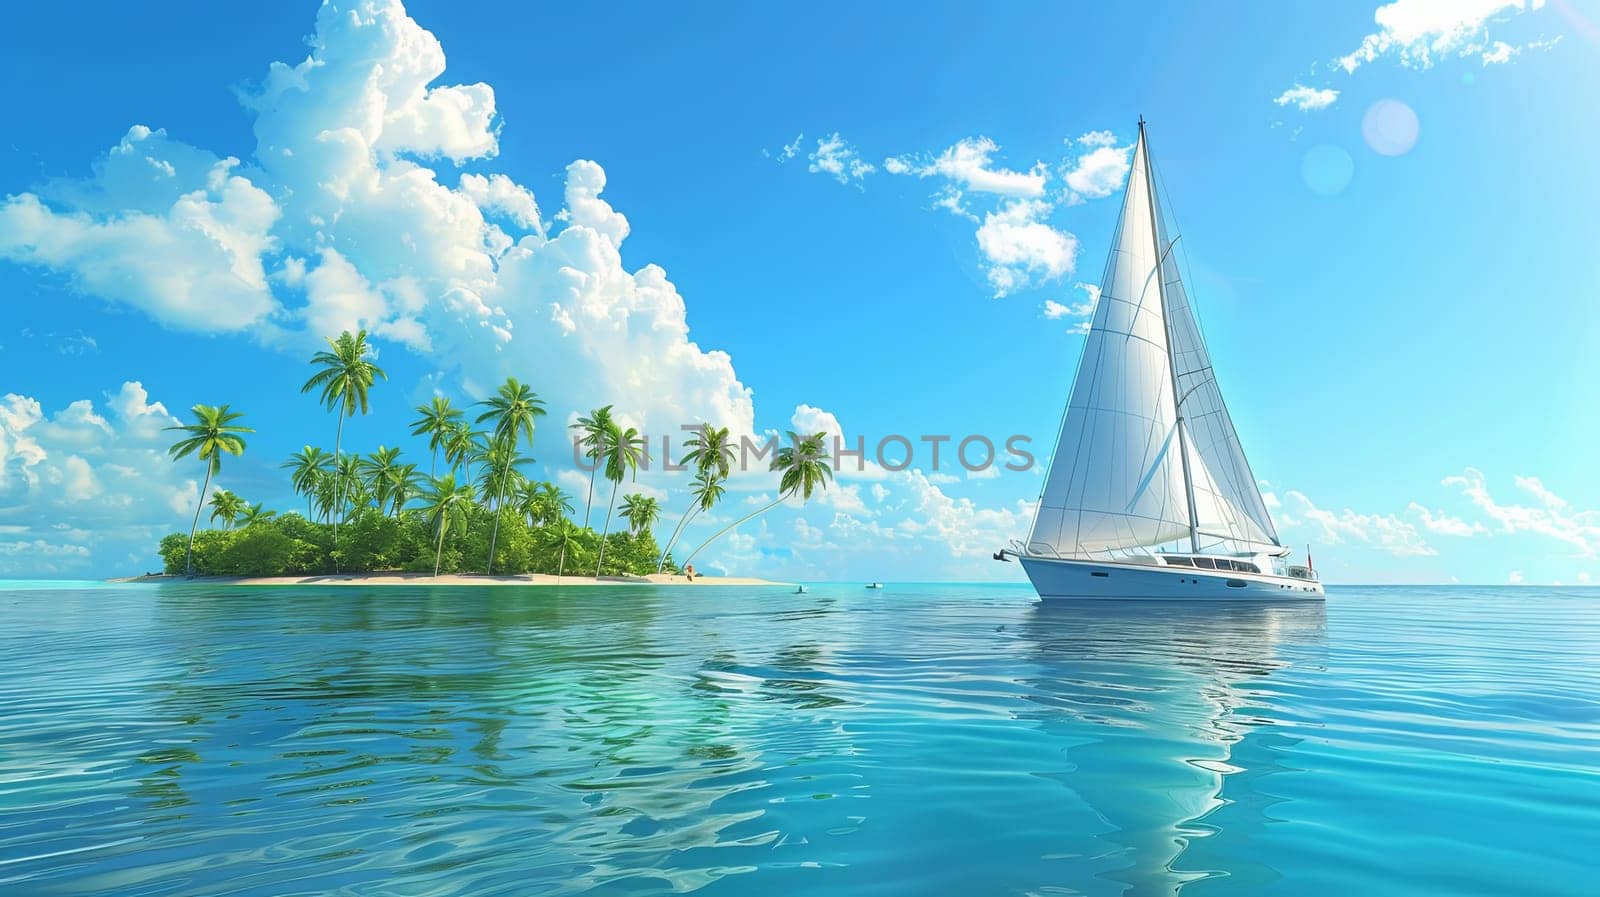 A majestic sailboat gracefully cruises through the ocean, with a serene small island in the background.